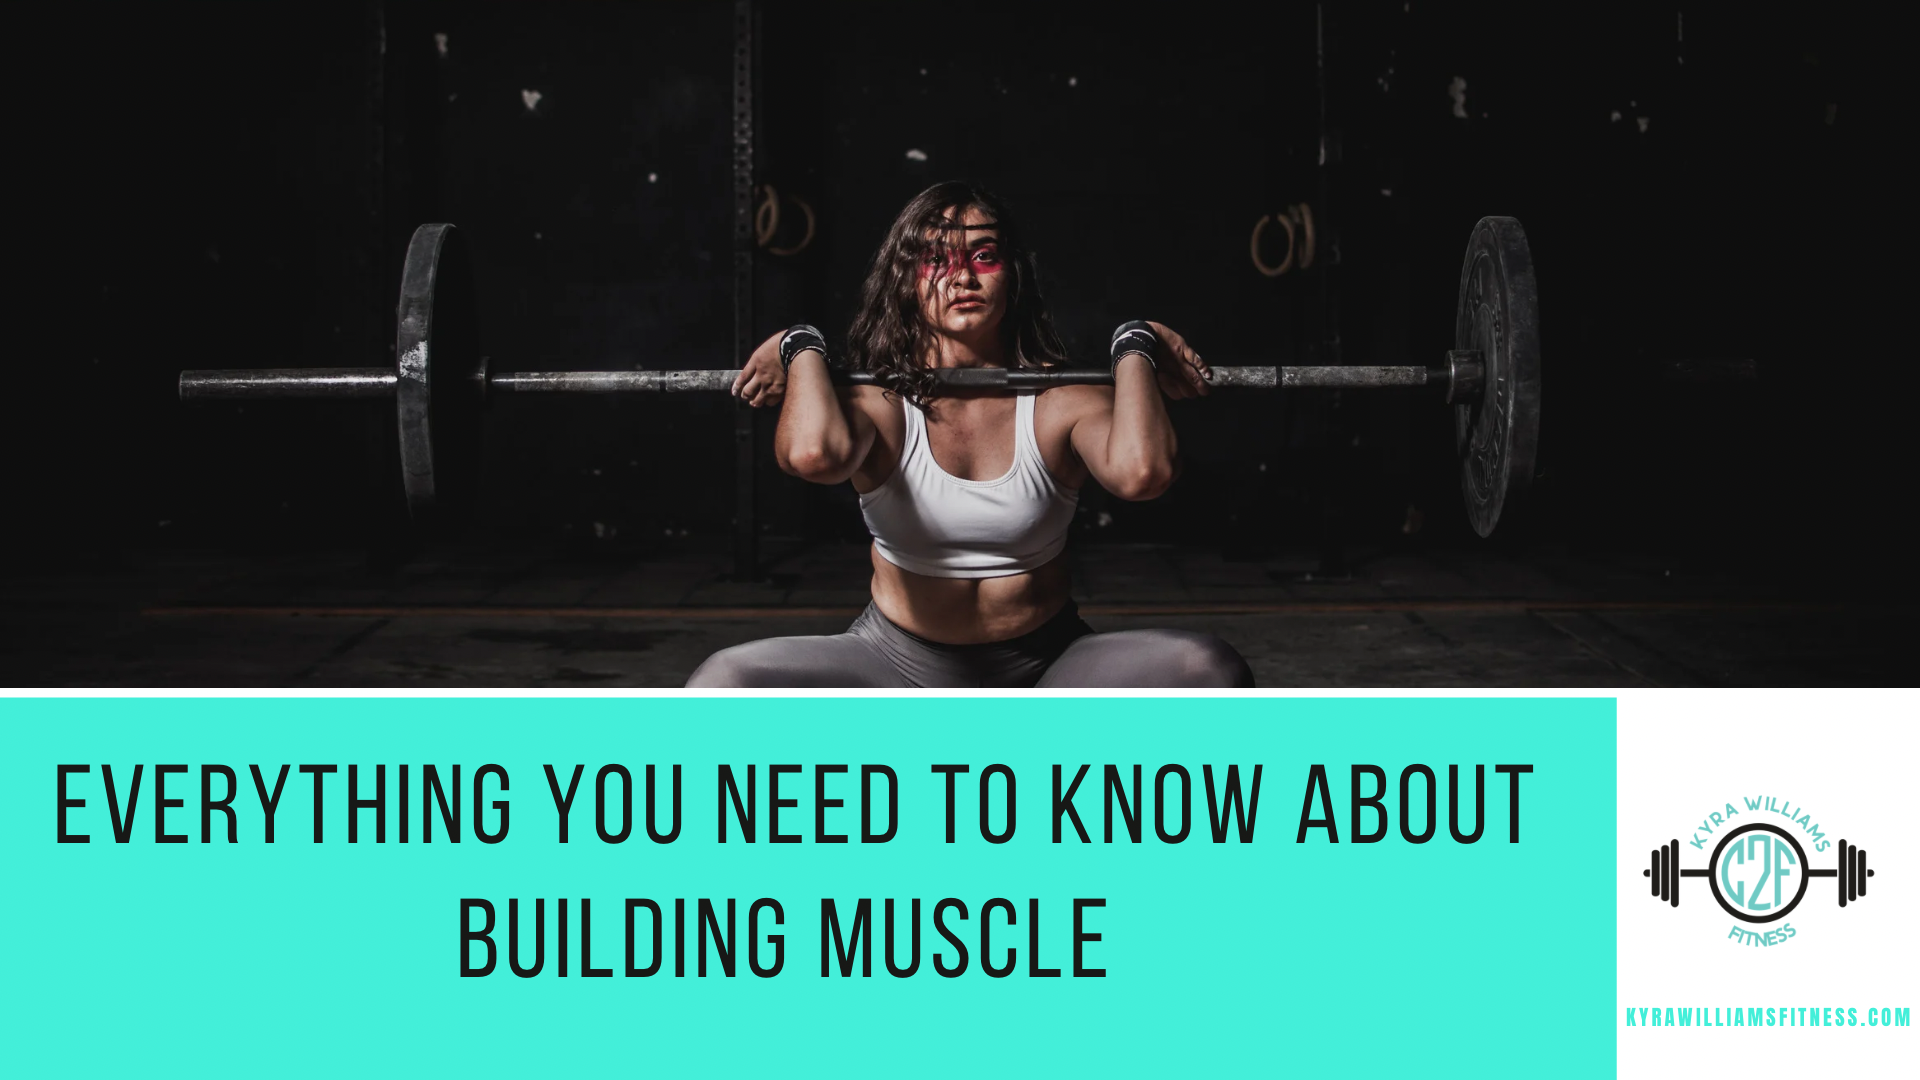 Everything You Need to Know About Building Muscle